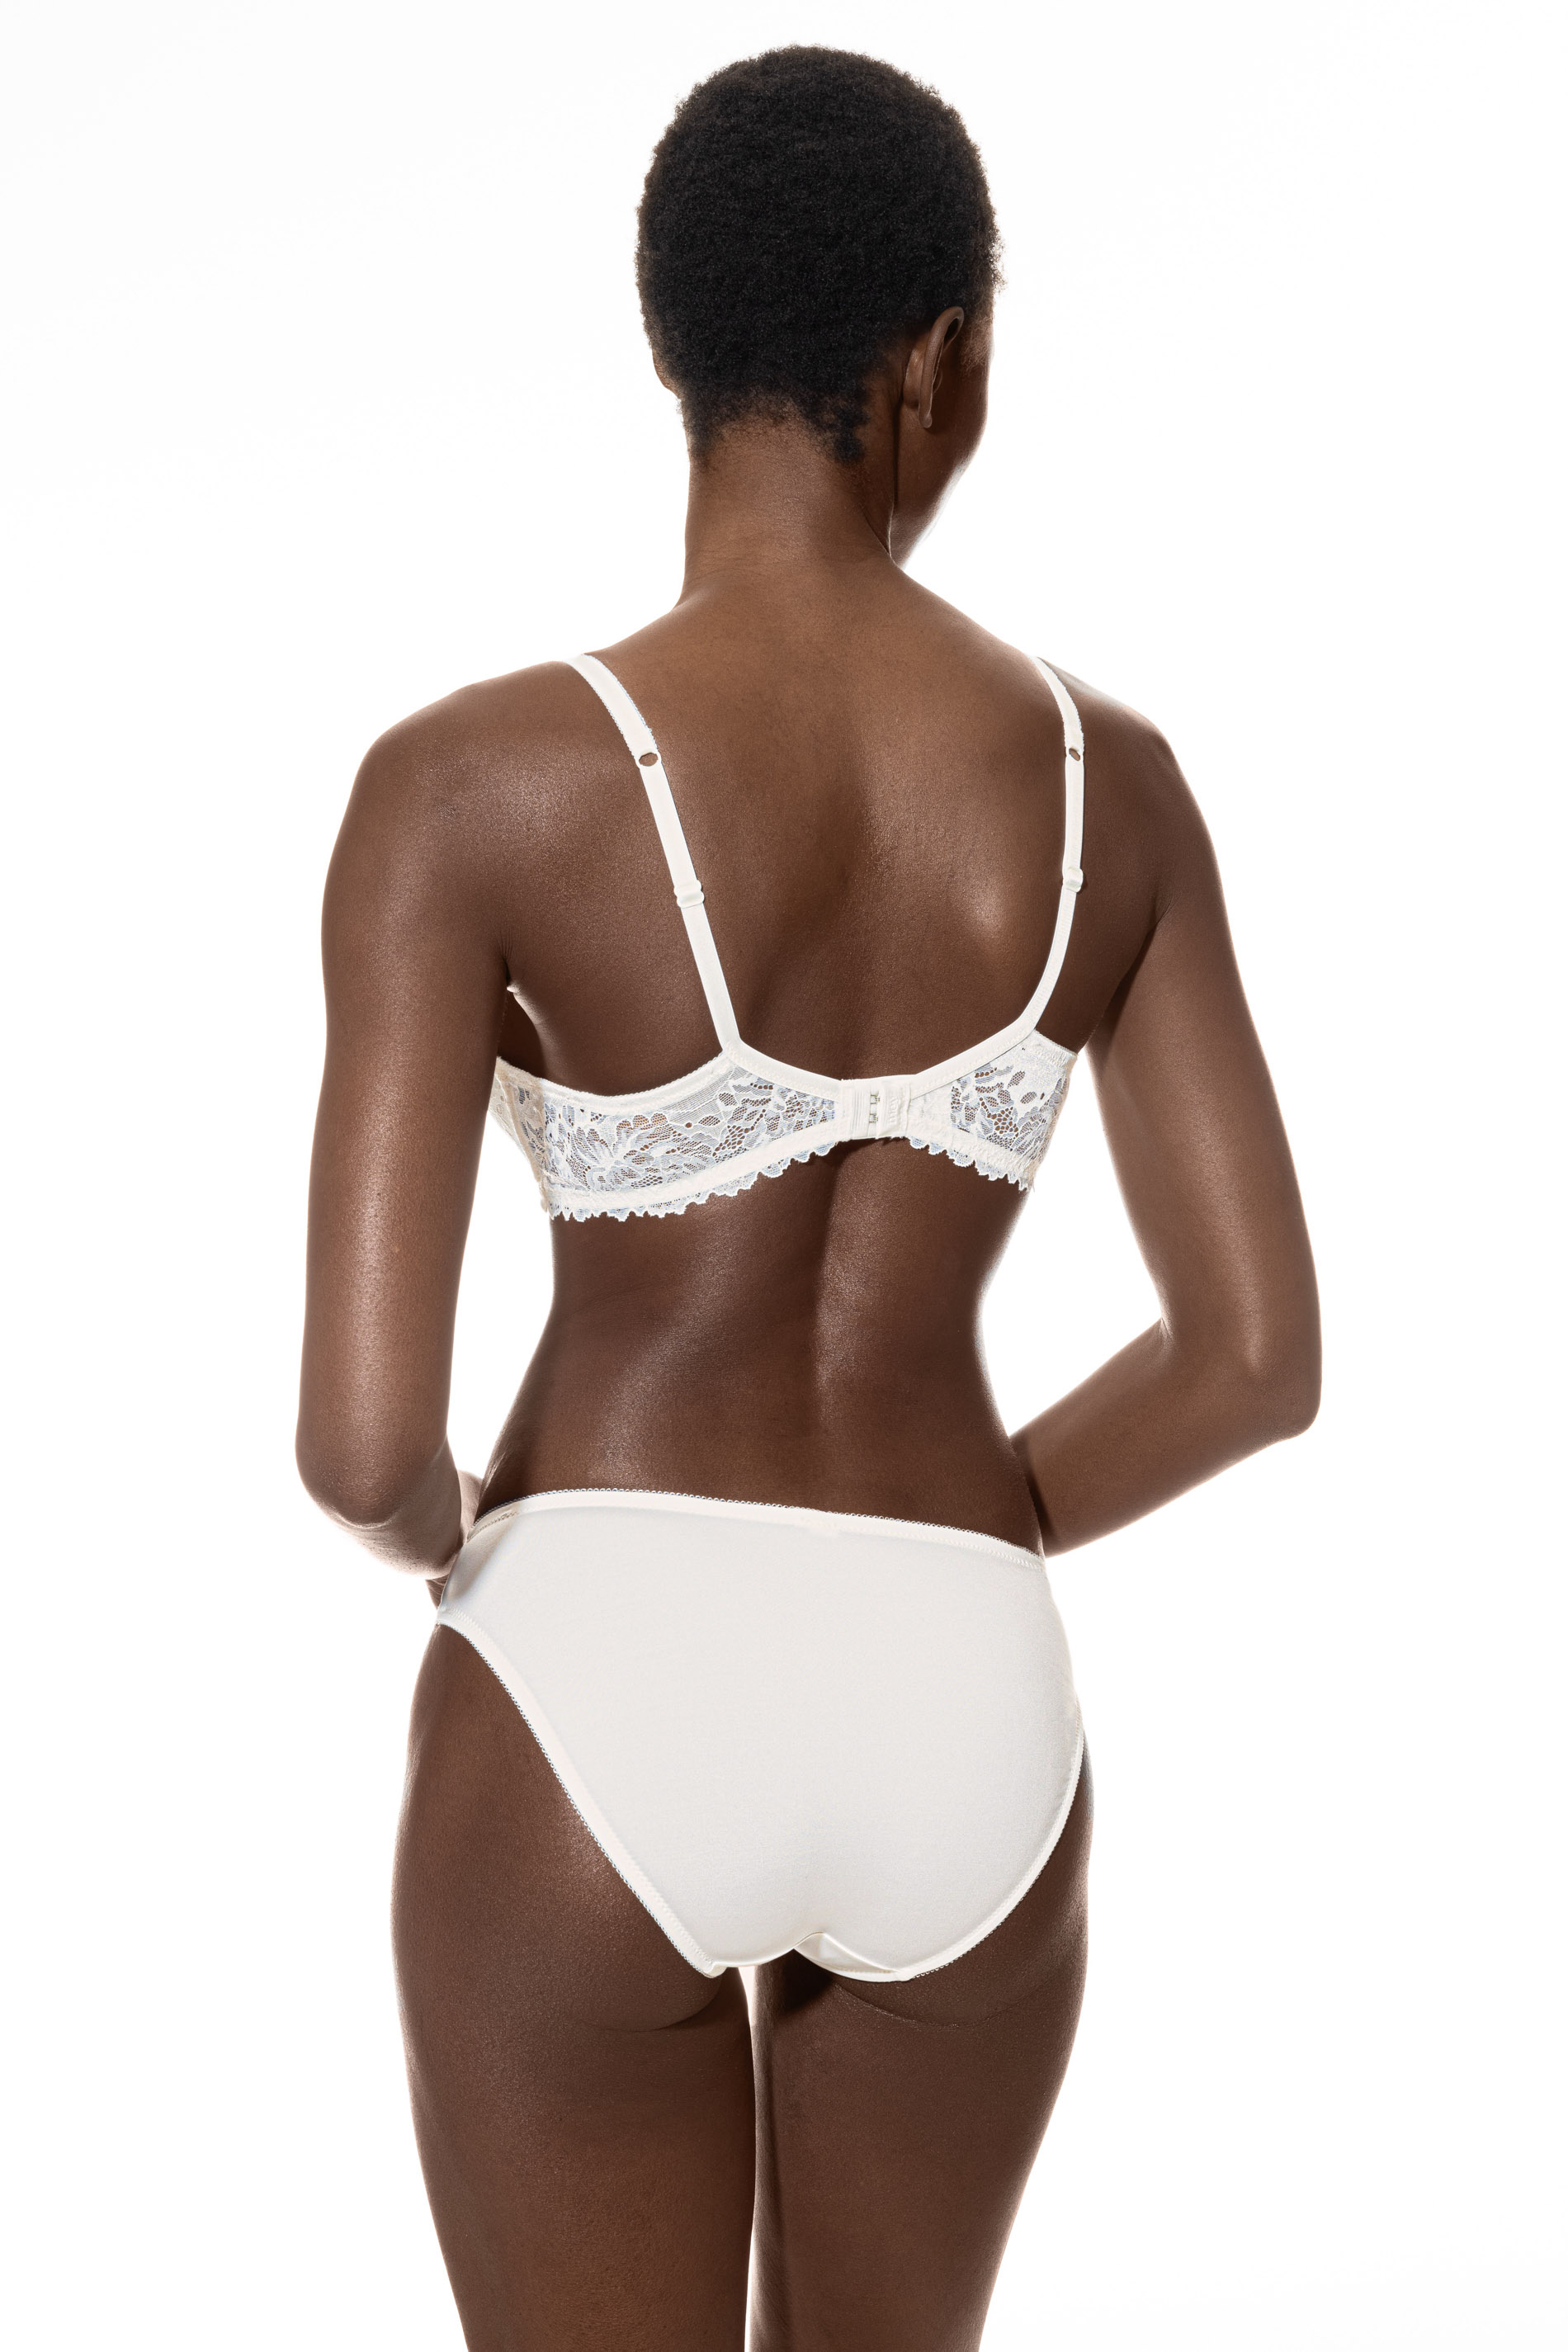 Spacer bra | no underwire Champagner Serie Luxurious Rear View | mey®